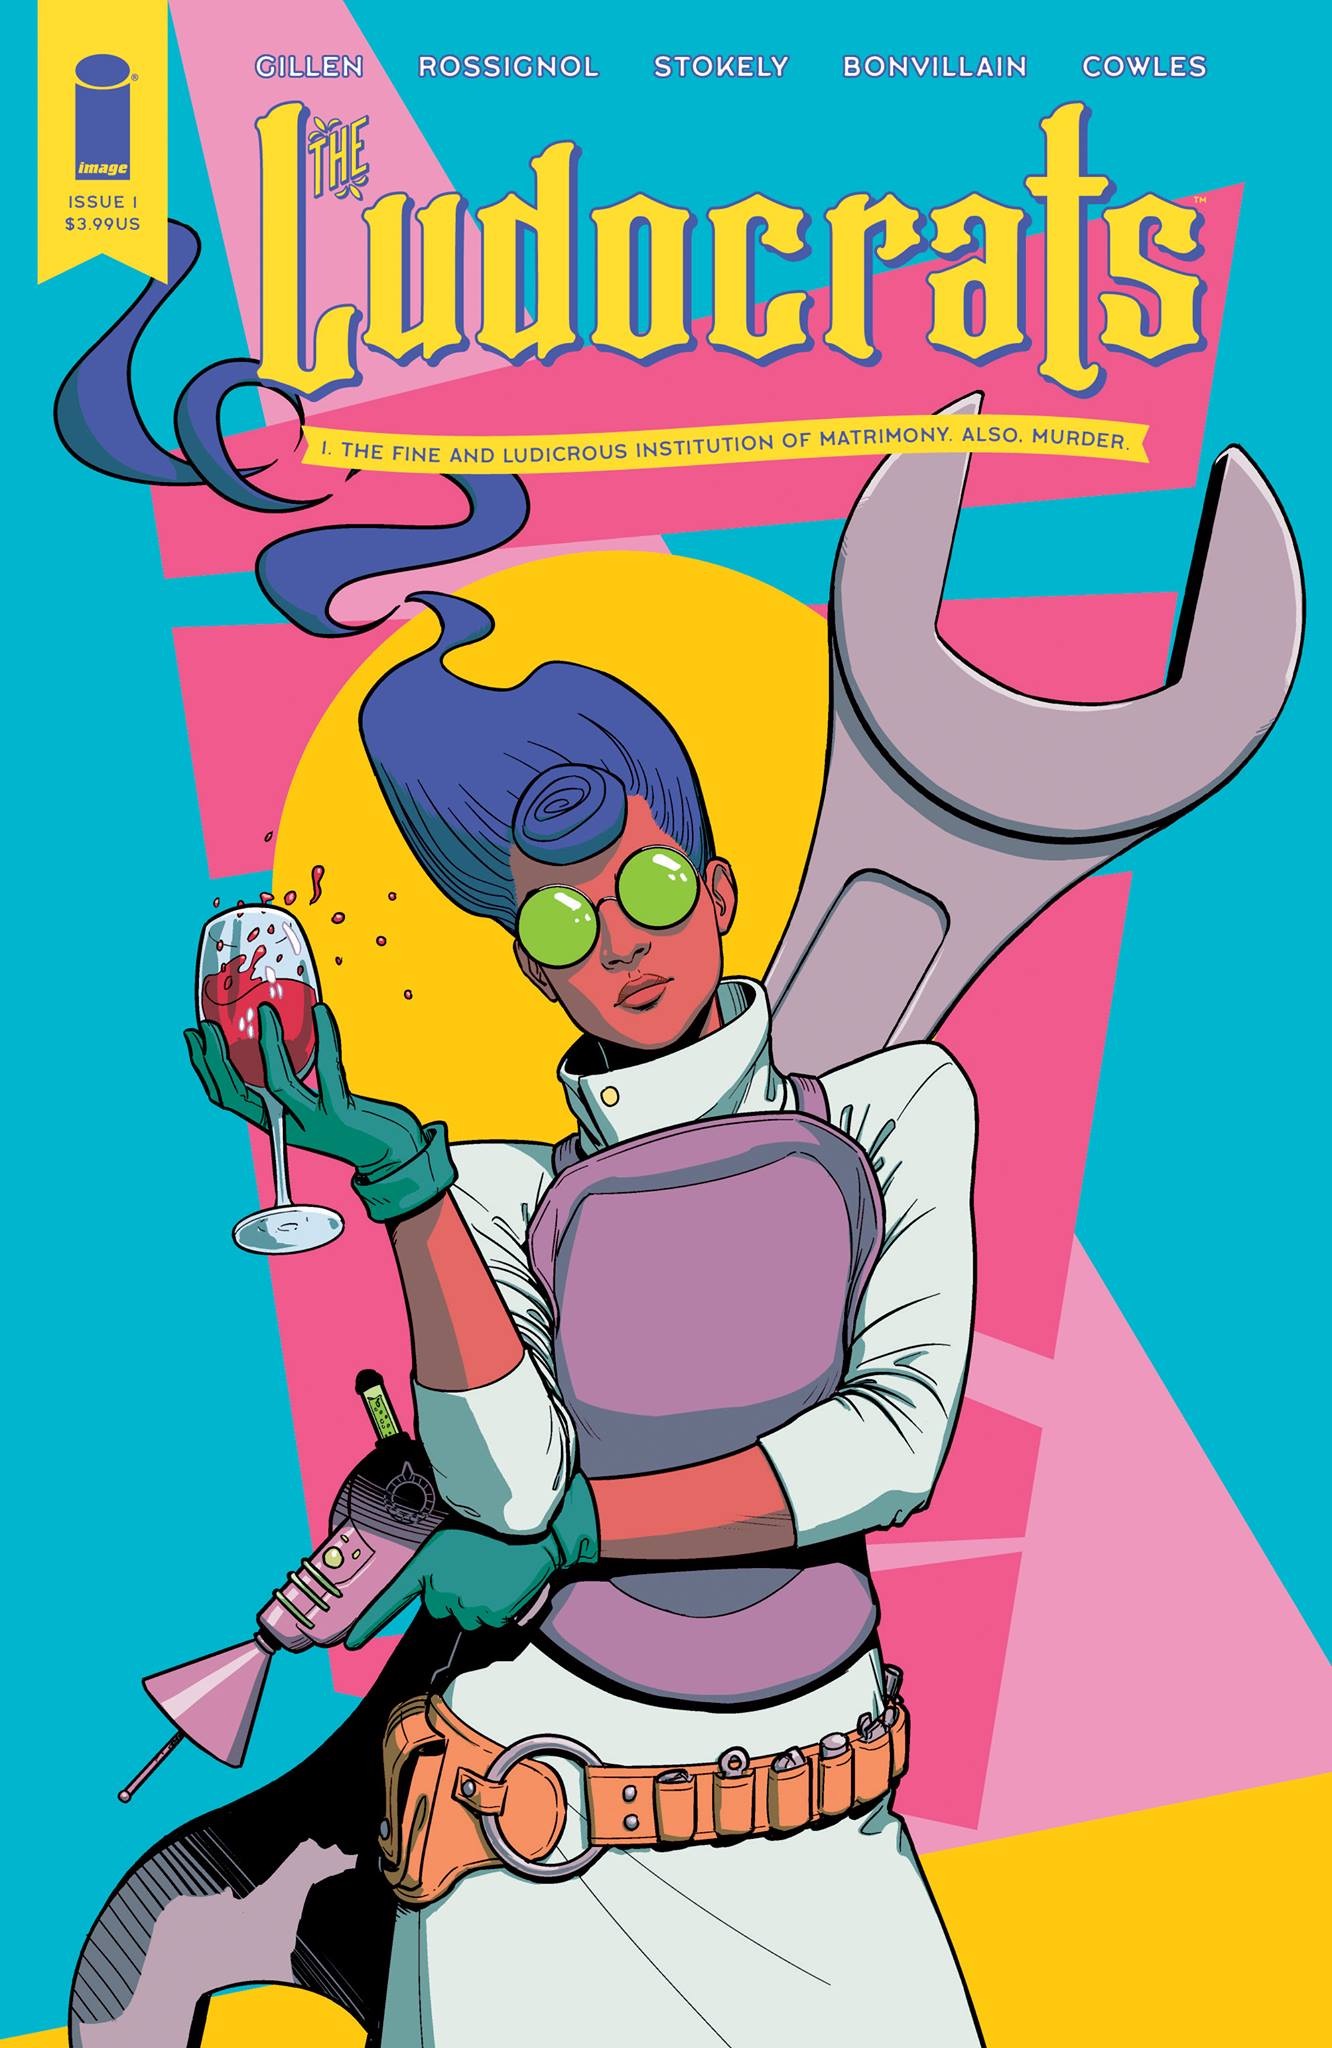 Jamie McKelvie - Gillen Rossignol Stokely Bonvillain Cowles image Issue 1 $3.99US I Ludacrats 1. The Fine And Ludicrous Institution Of Matrimony. Also. Murded